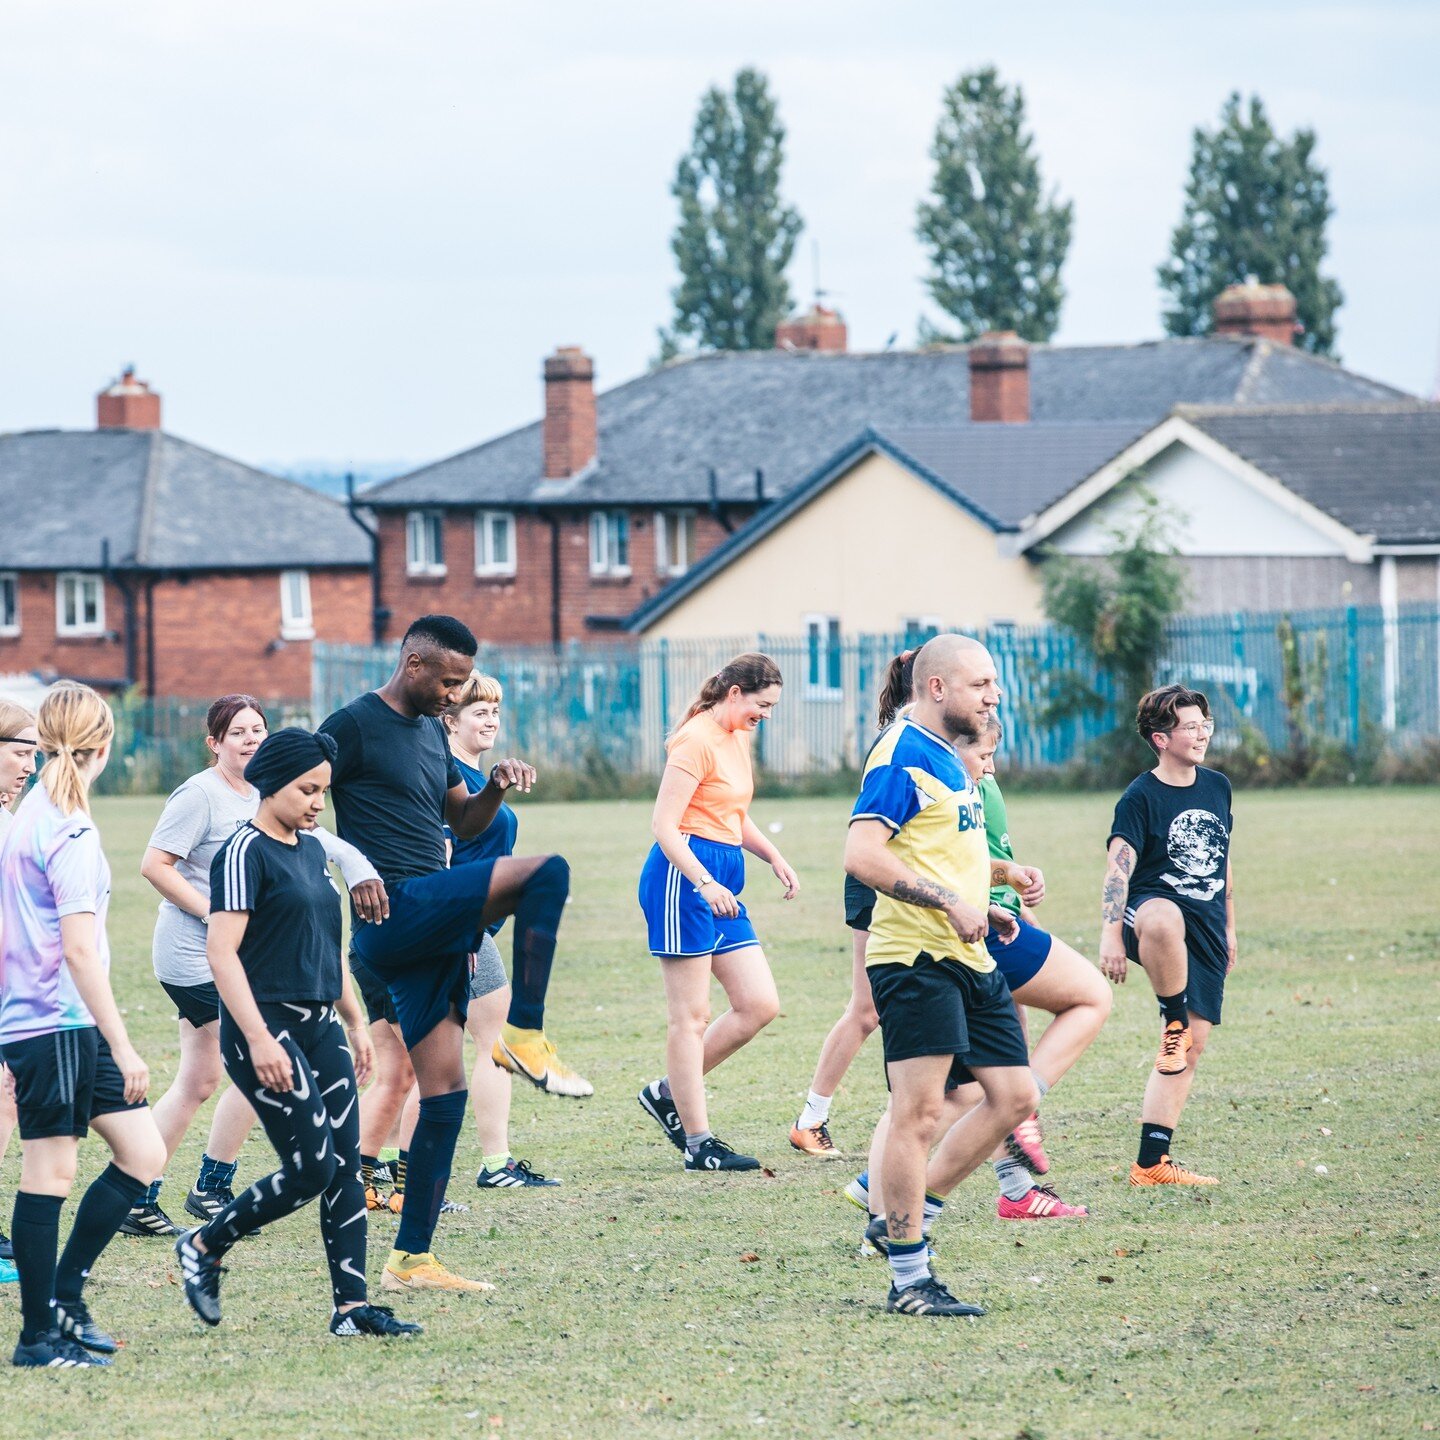 PRE-SEASON TRAINING 📸

This week our friend @leebrown_photo popped down to our training session to snap a few shots of us as we get fighting fit for the upcoming season.

It was great to see so many new (and old!) friendly faces from across all four